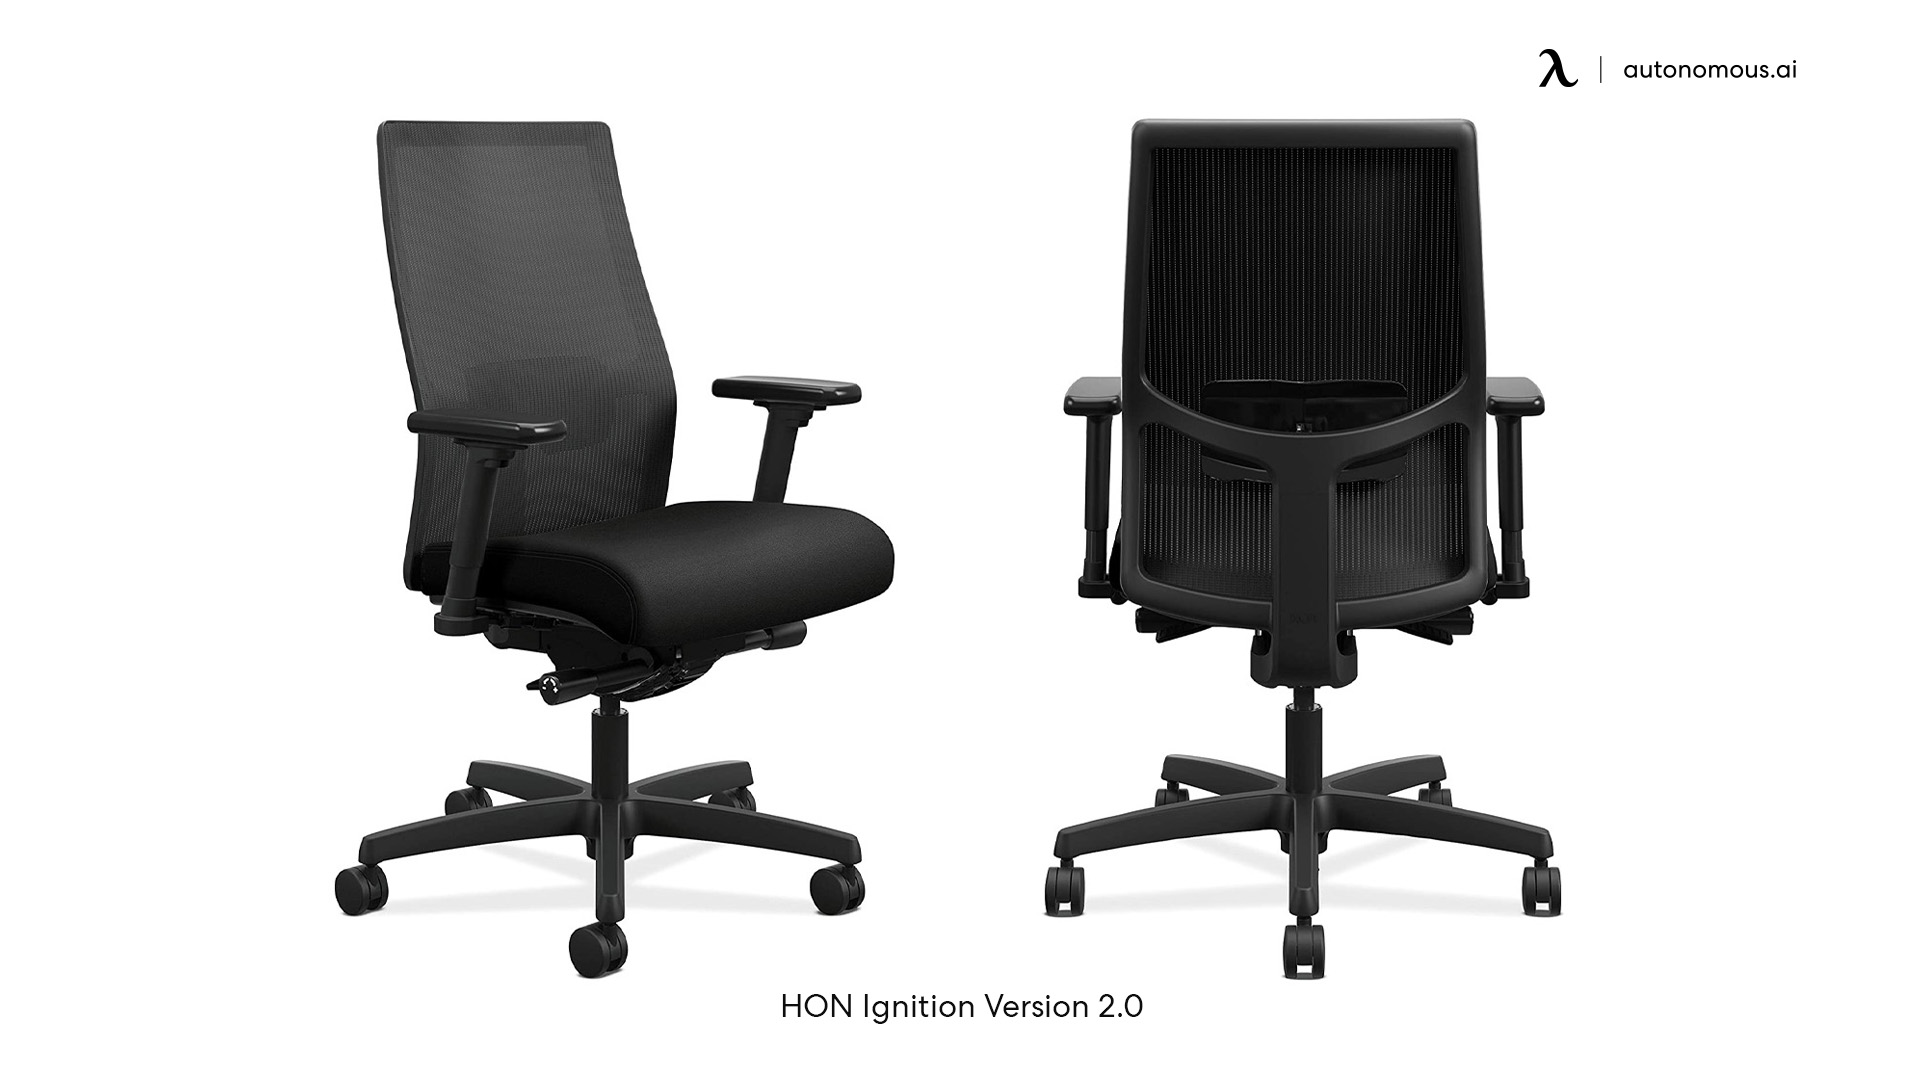 Hon Ignition rolling office chair